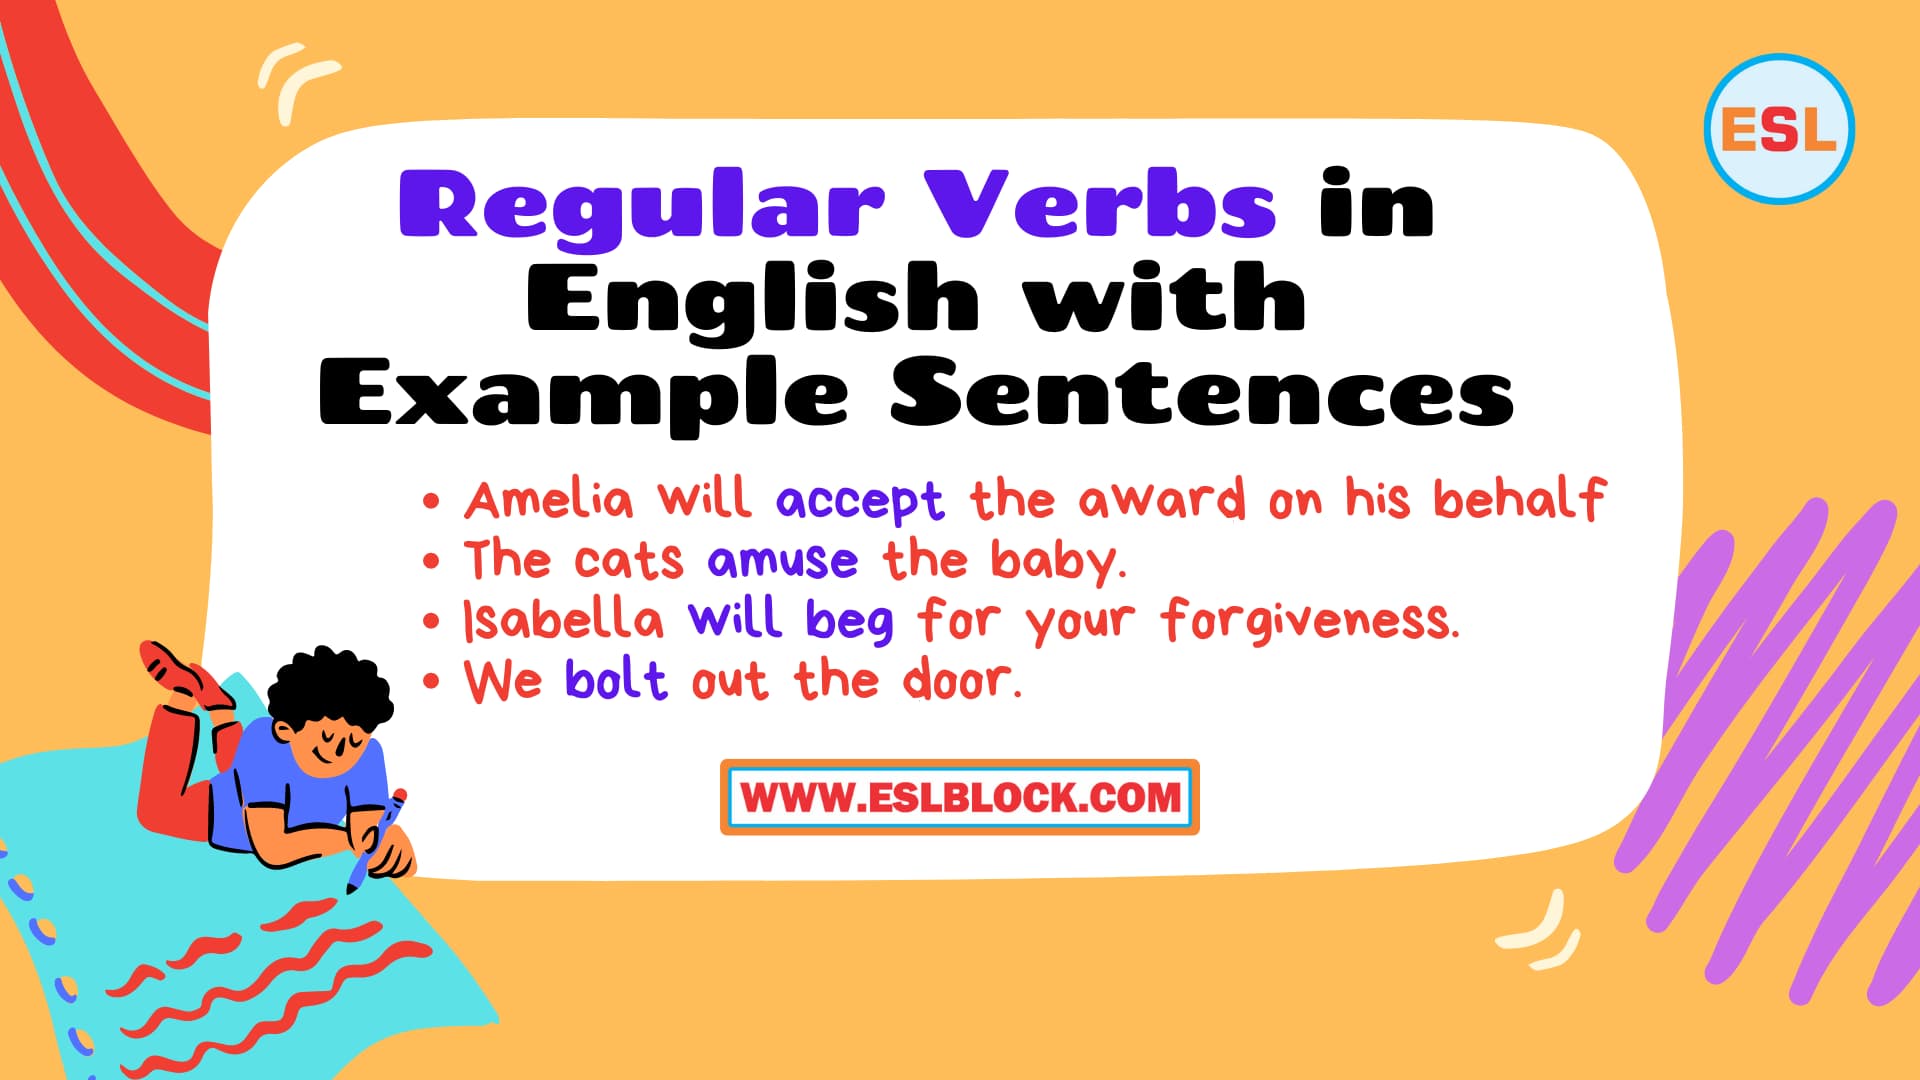 100 Example Sentences Using Regular Verbs, All Regular Verbs, List of Regular Verbs, Regular Verbs, Regular verbs list, Regular Verbs Vocabulary, Regular Verbs with Example Sentences, Types of Verbs, Types of Verbs with Example Sentences, What are Regular Verbs, What are the types of Verbs, What are Verbs, What is a Verb